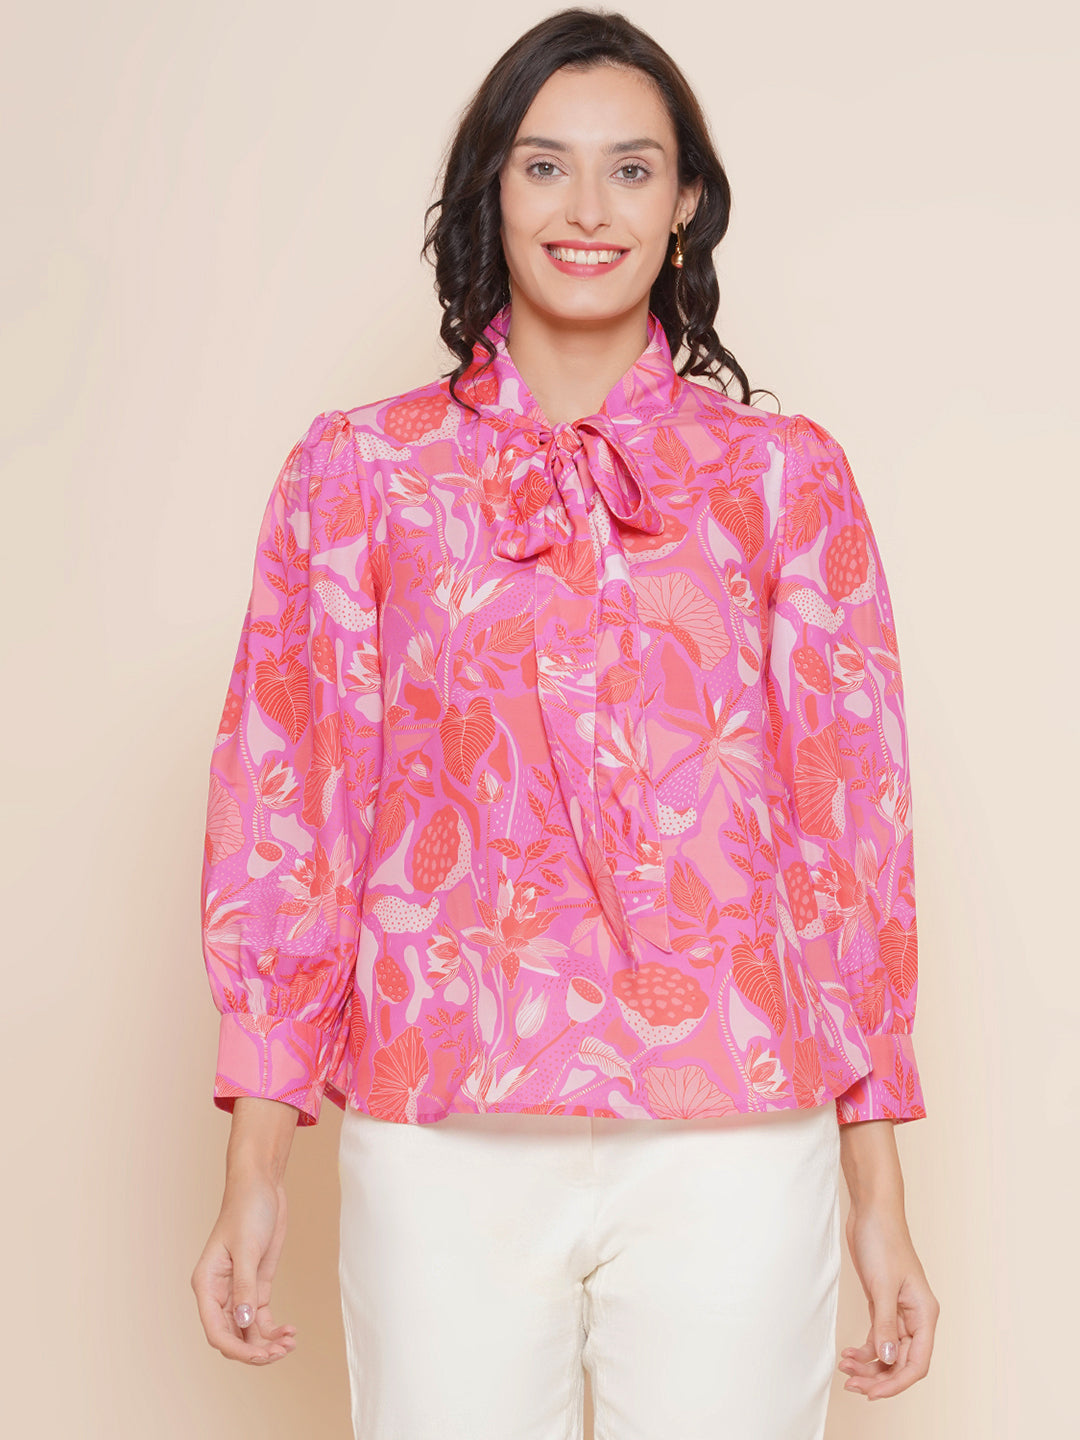 Bhama Couture Pink Floral Printed Top